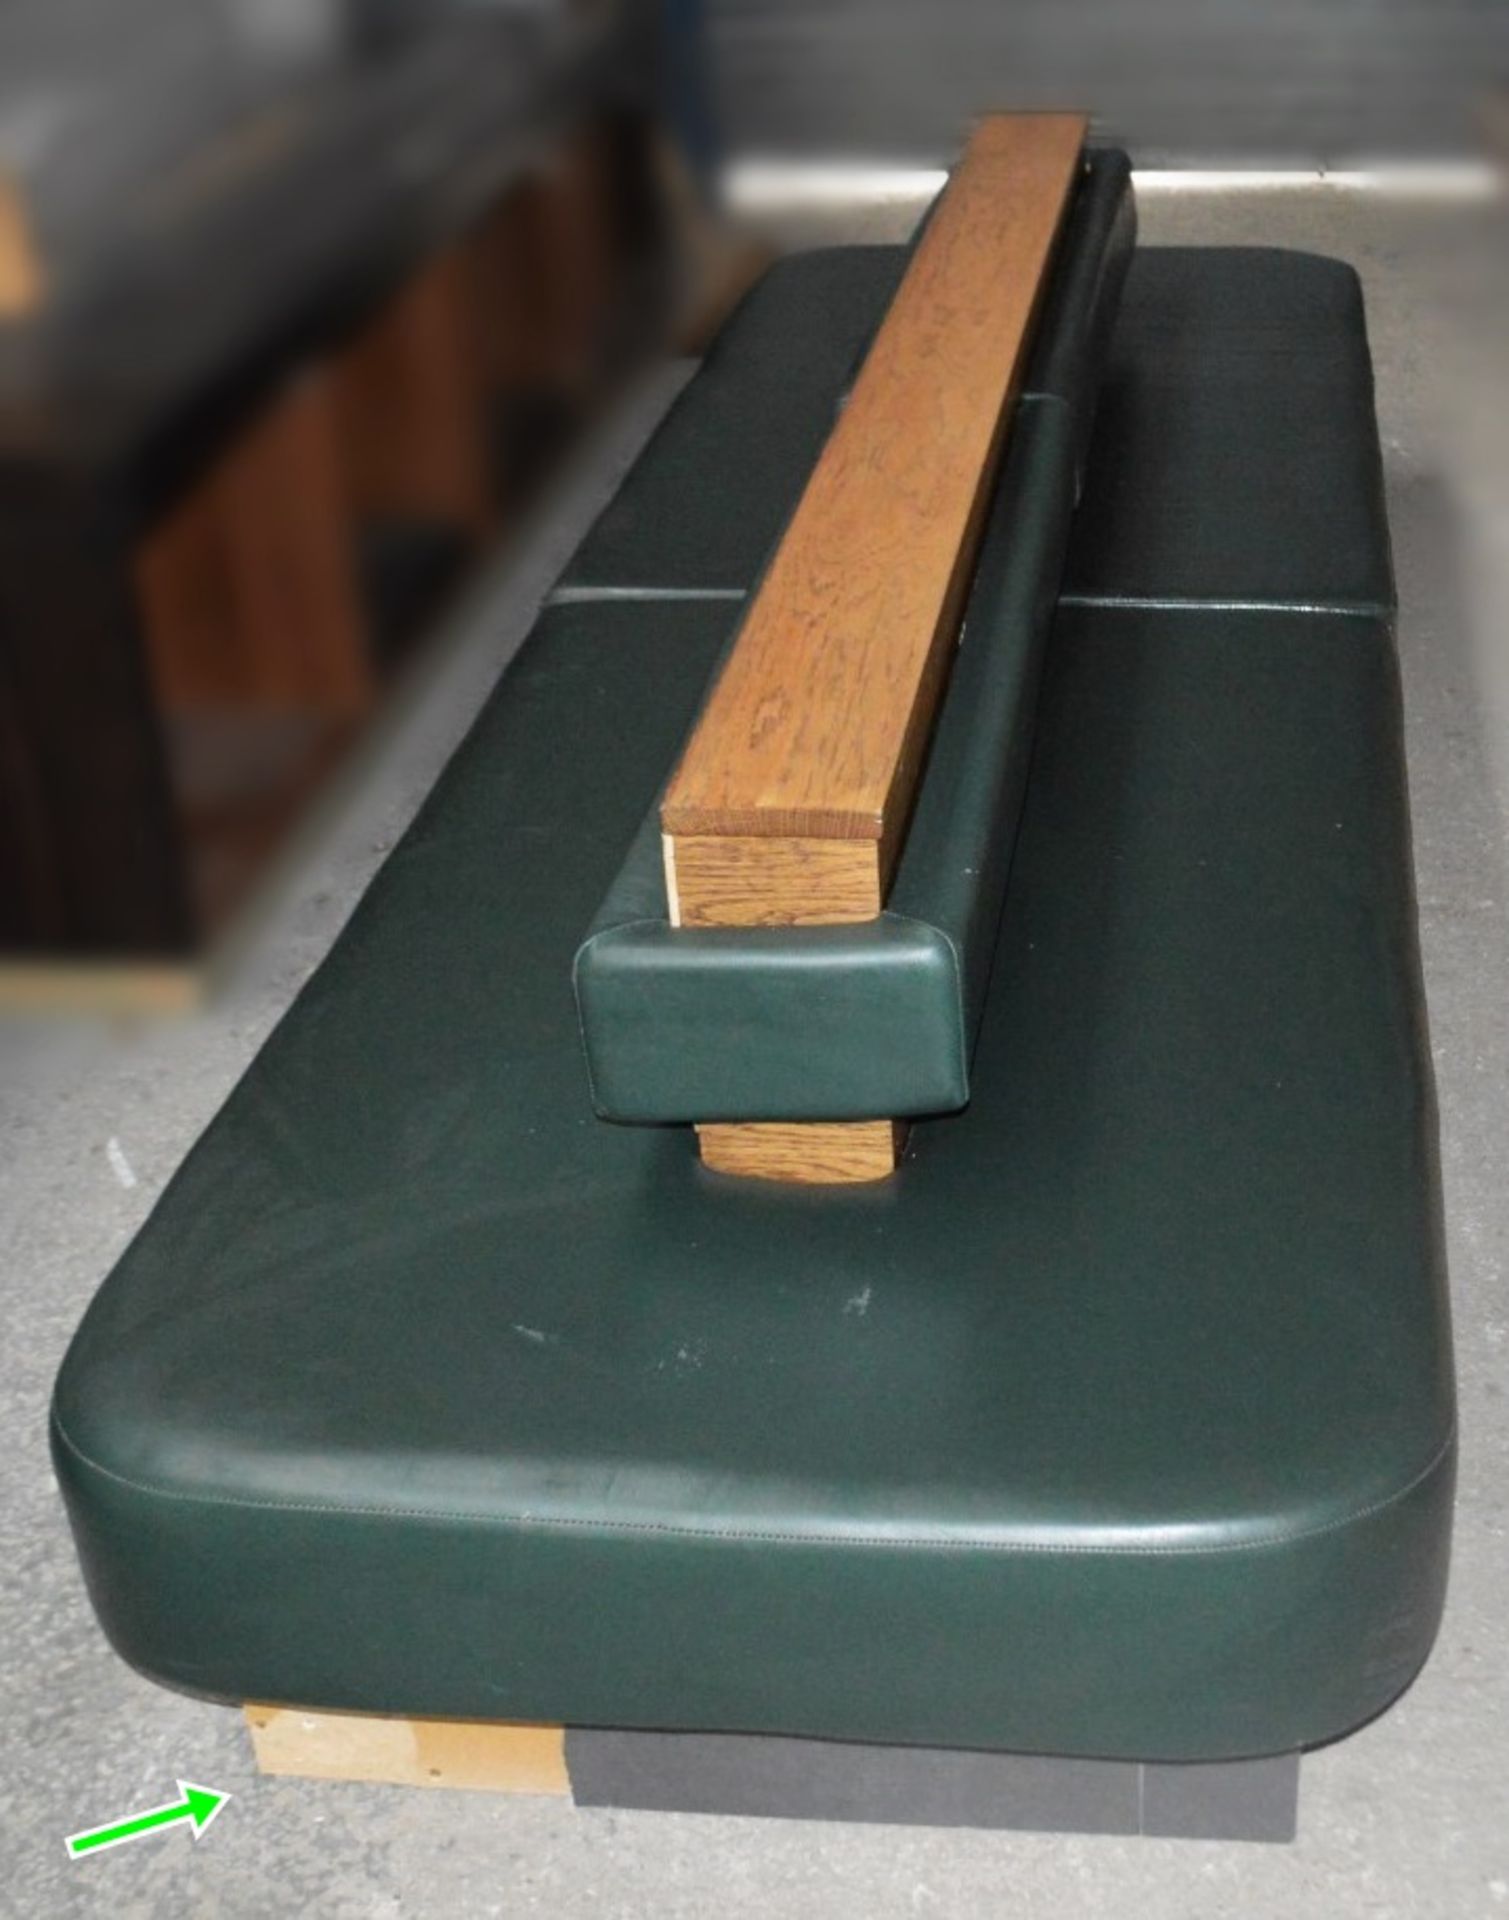 1 x Large Seating Bench Upholstered In A Green Faux Leather - Dimensions: H62 x W285 x D88cm - Image 3 of 4